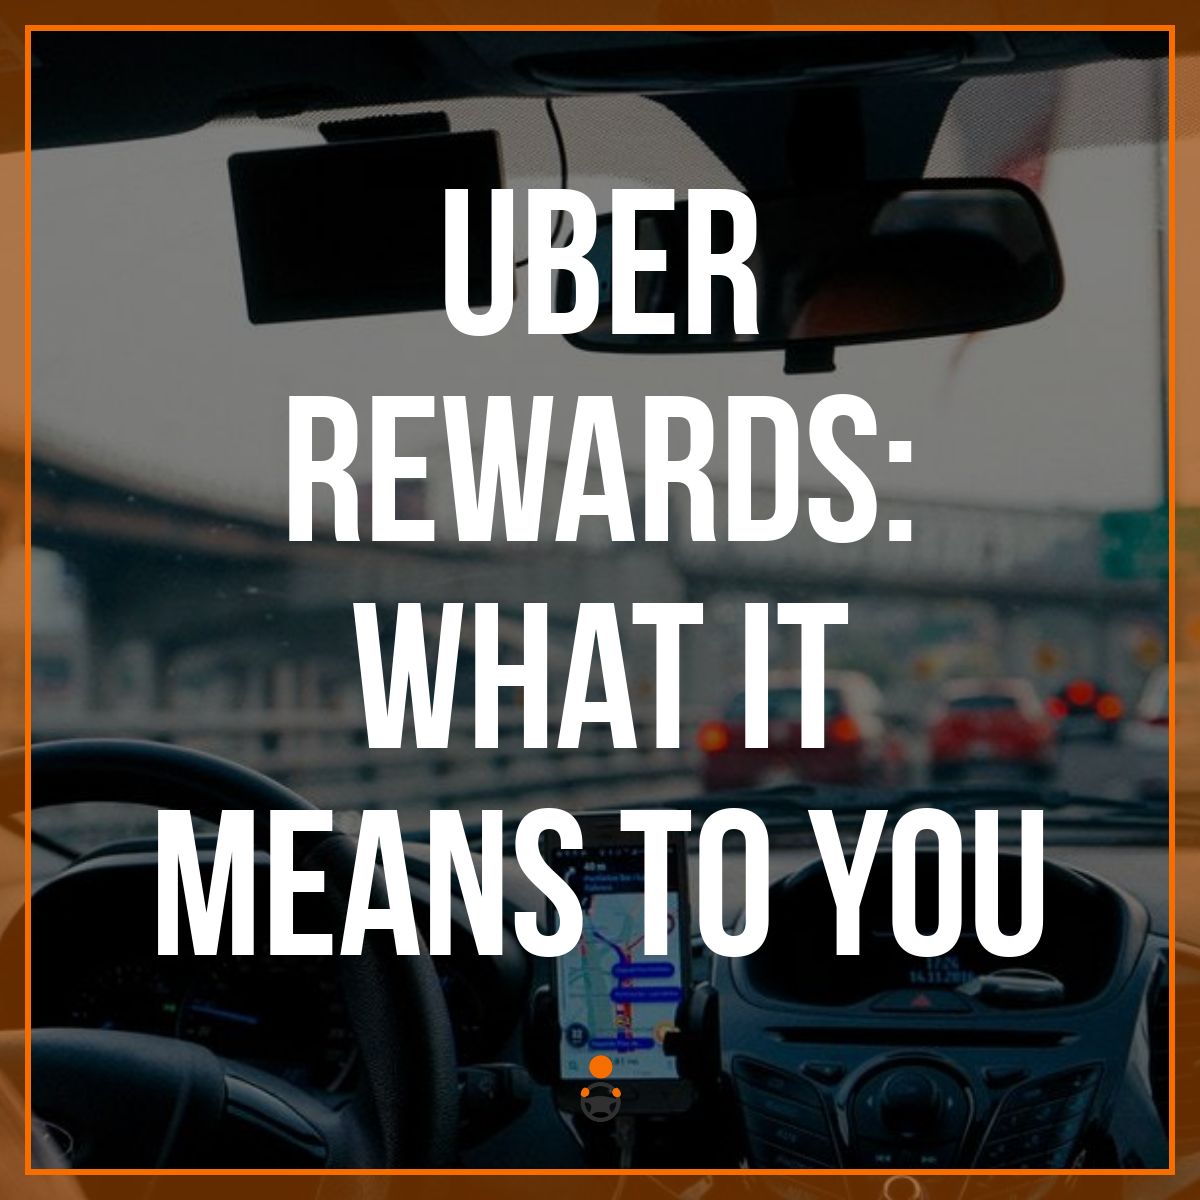 Uber Rewards: What it Means to You